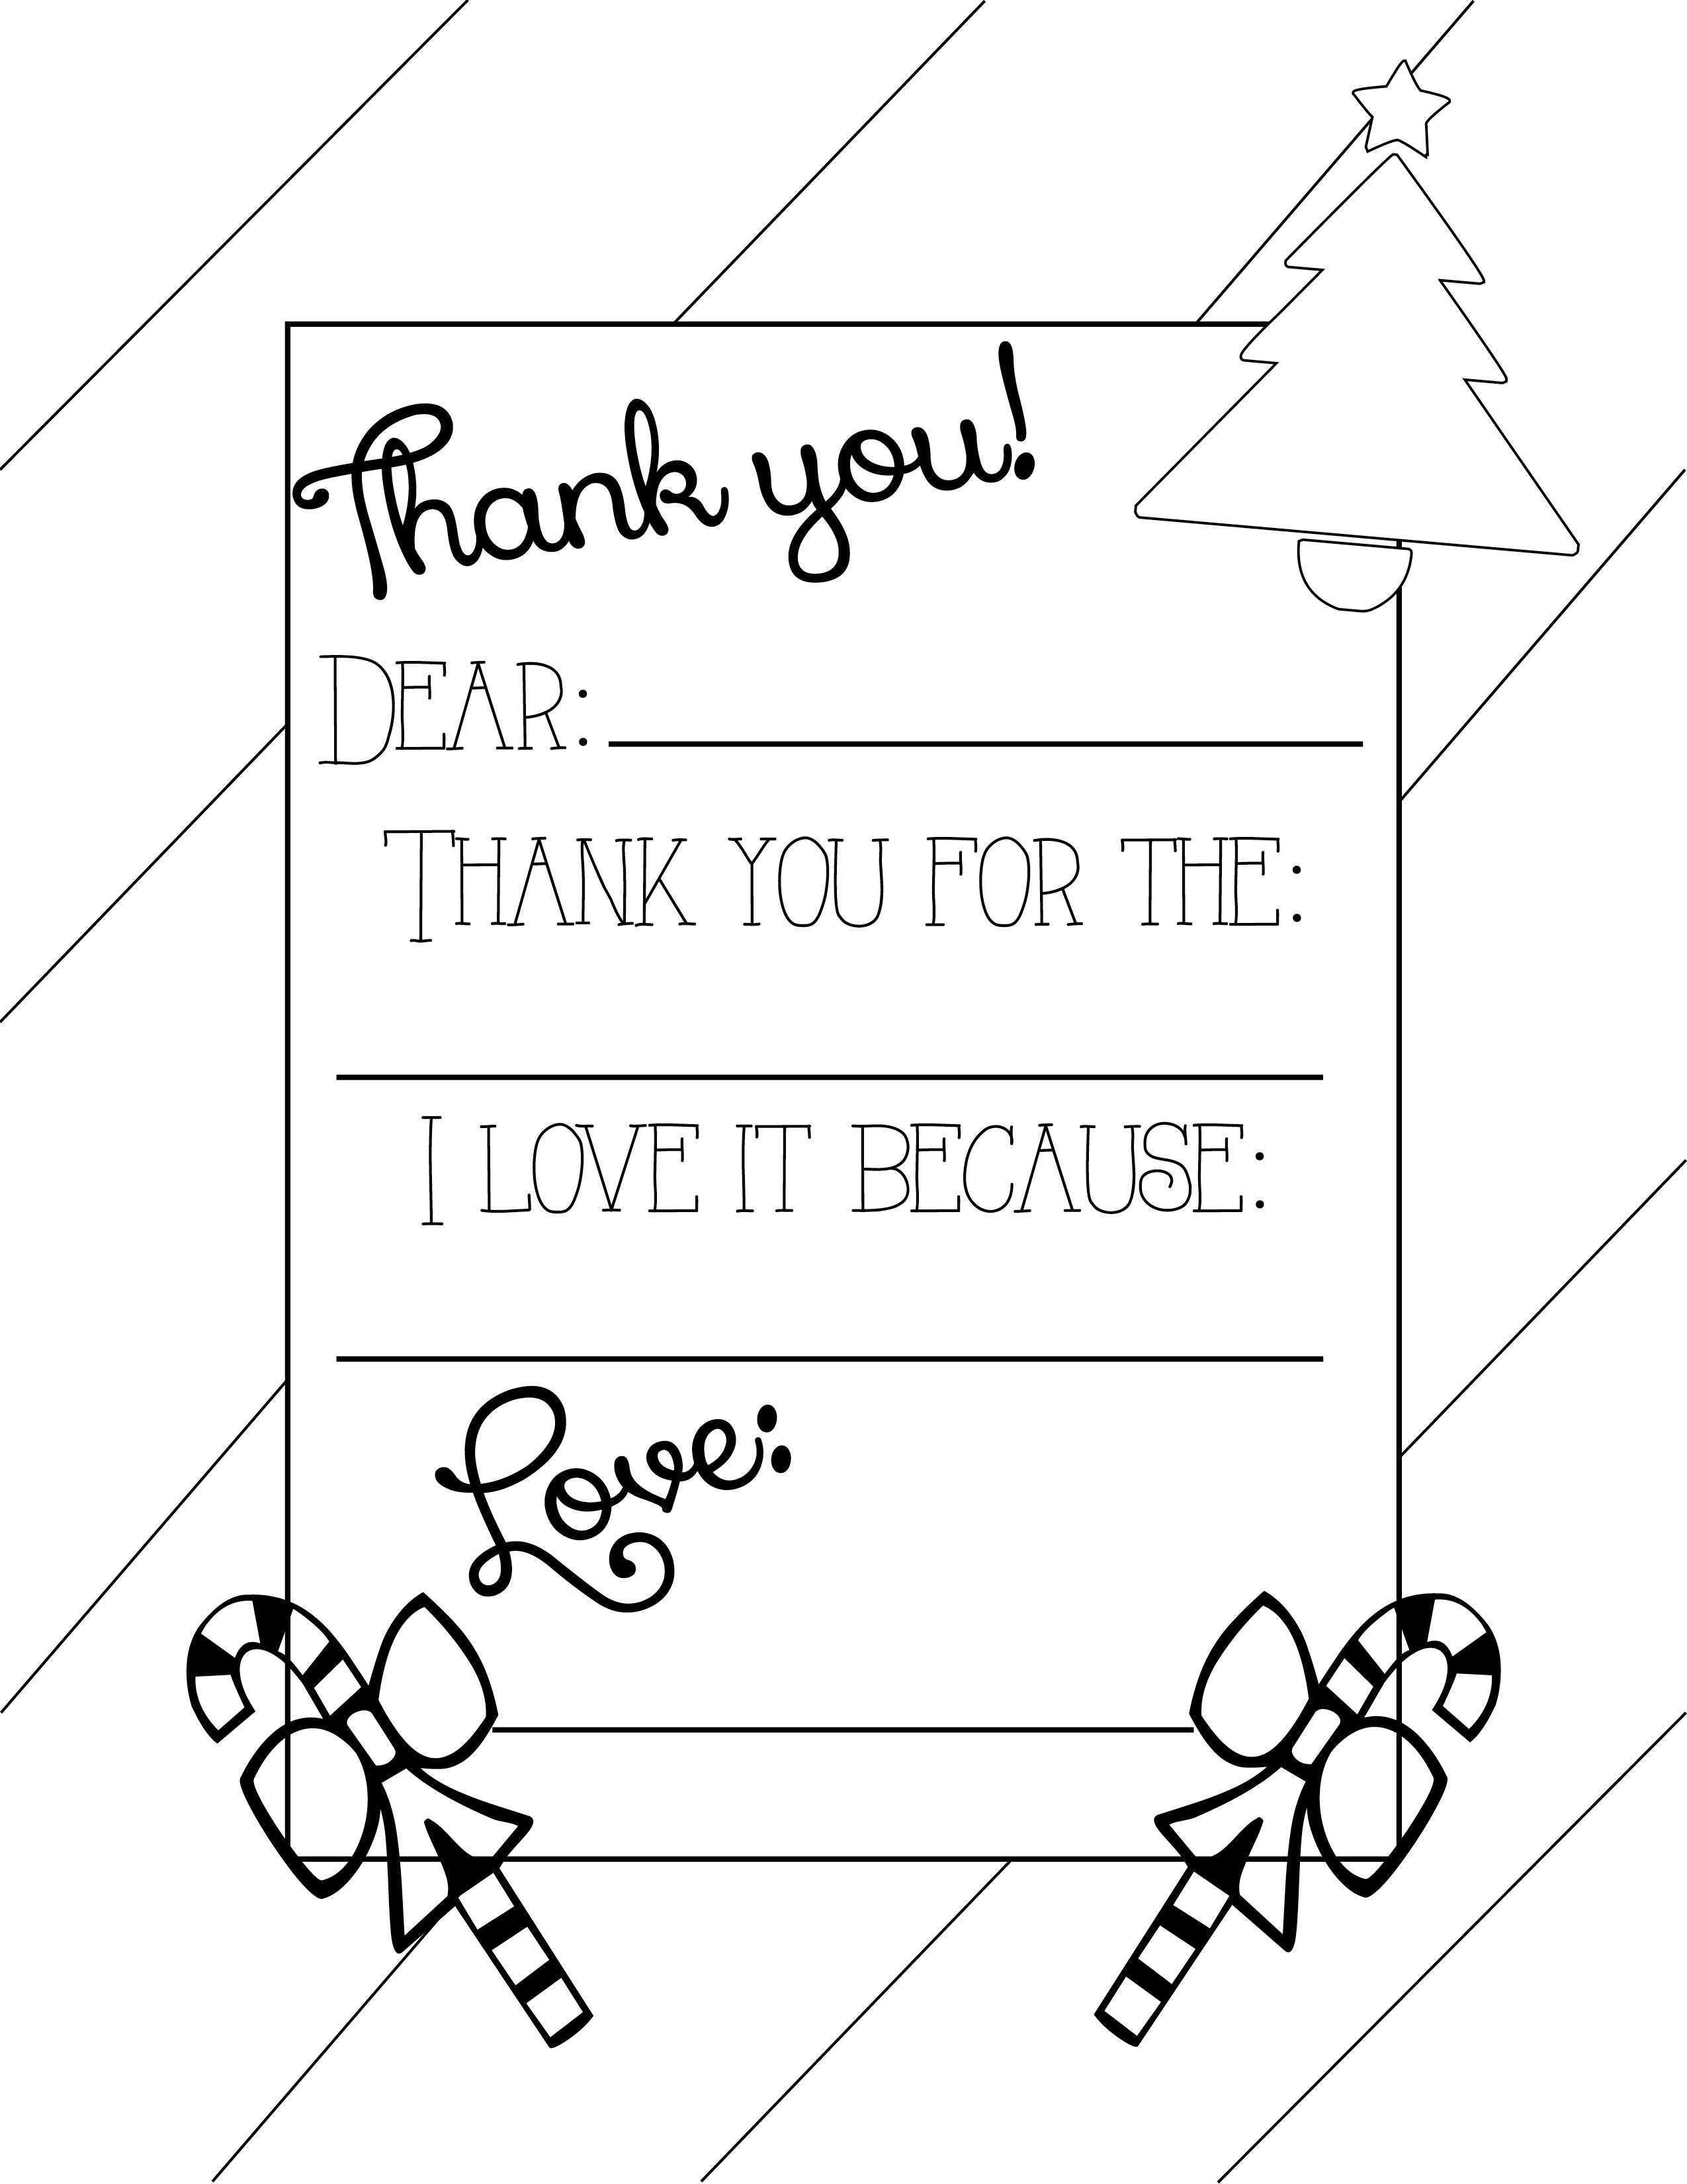 93 Blank Free Thank You Card Template Black And White Templates with Free Thank You Card Template Black And White